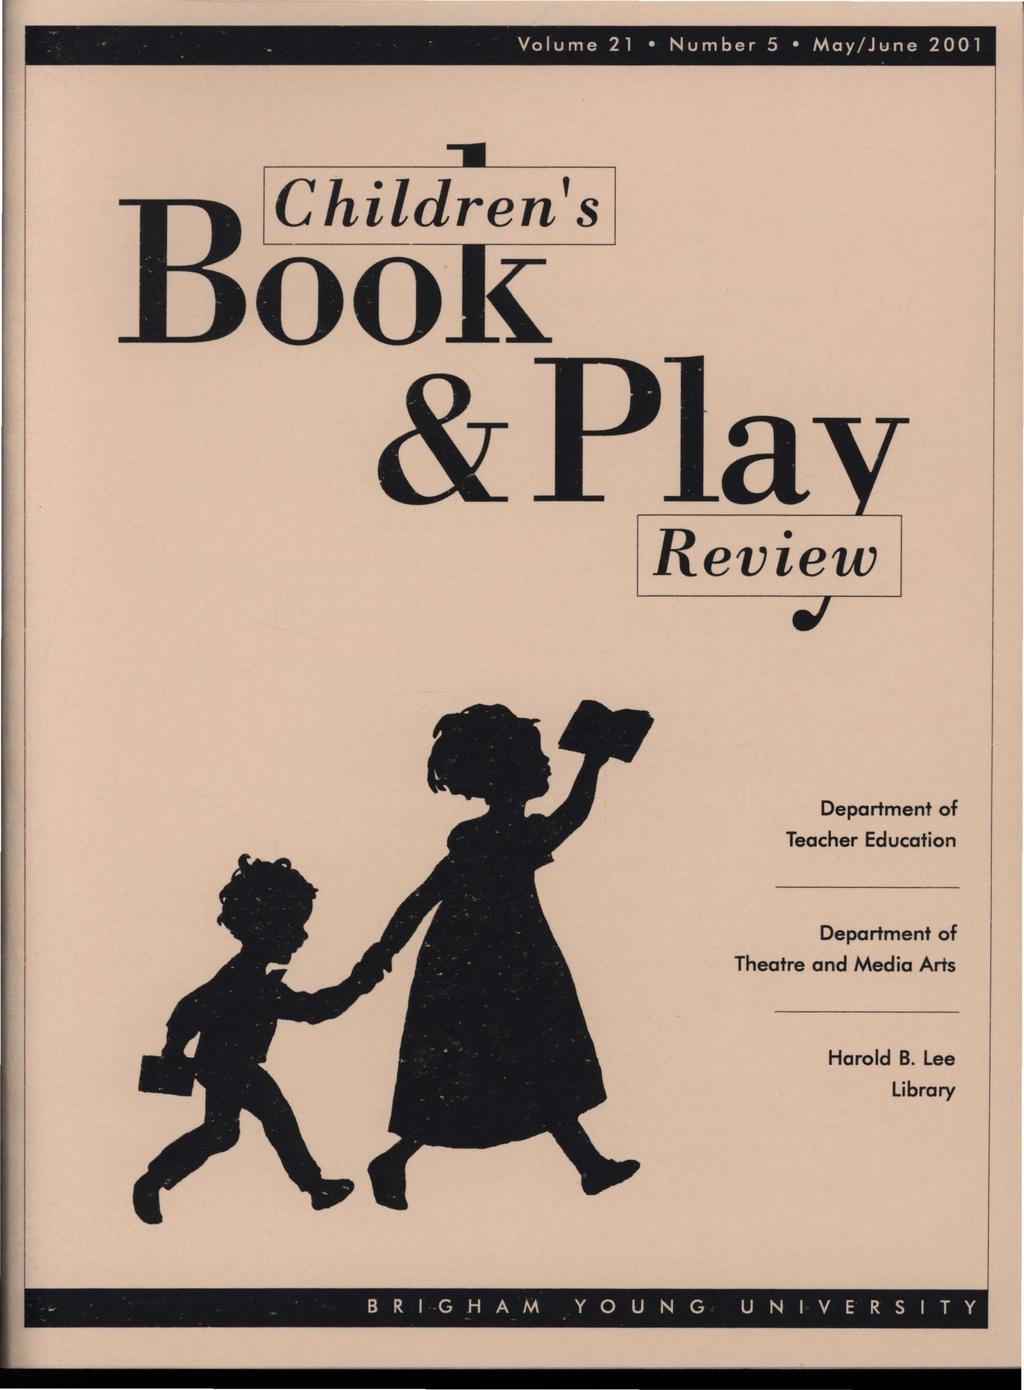 Review: Front Volume Matter 21 Number 5 May/June 2001 Children's Review Department of Teacher Education Department